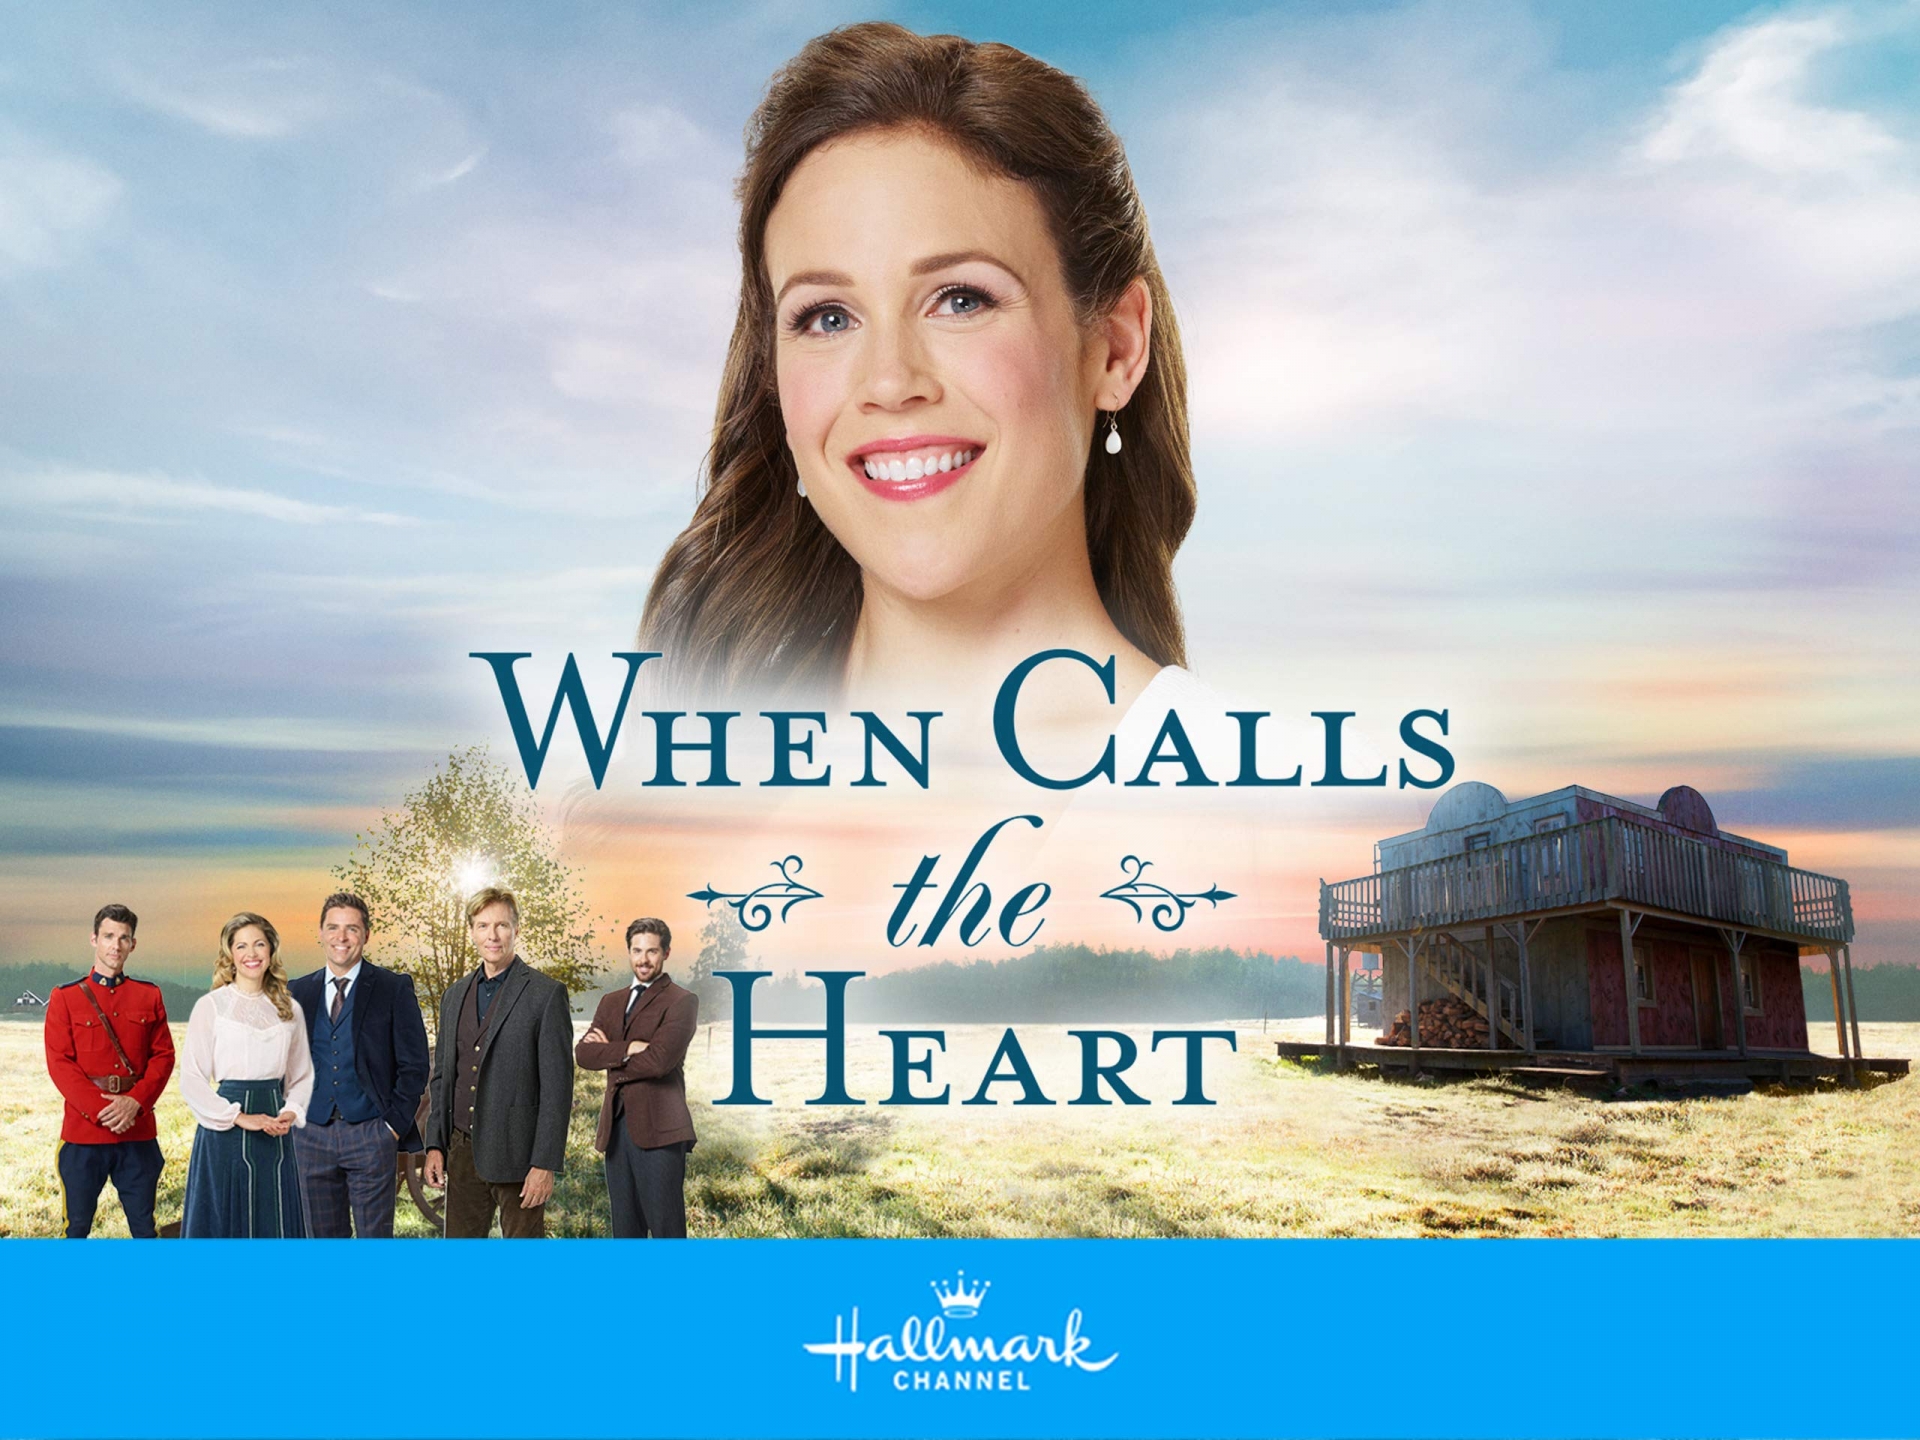 Where to Watch "When Calls the Heart"?